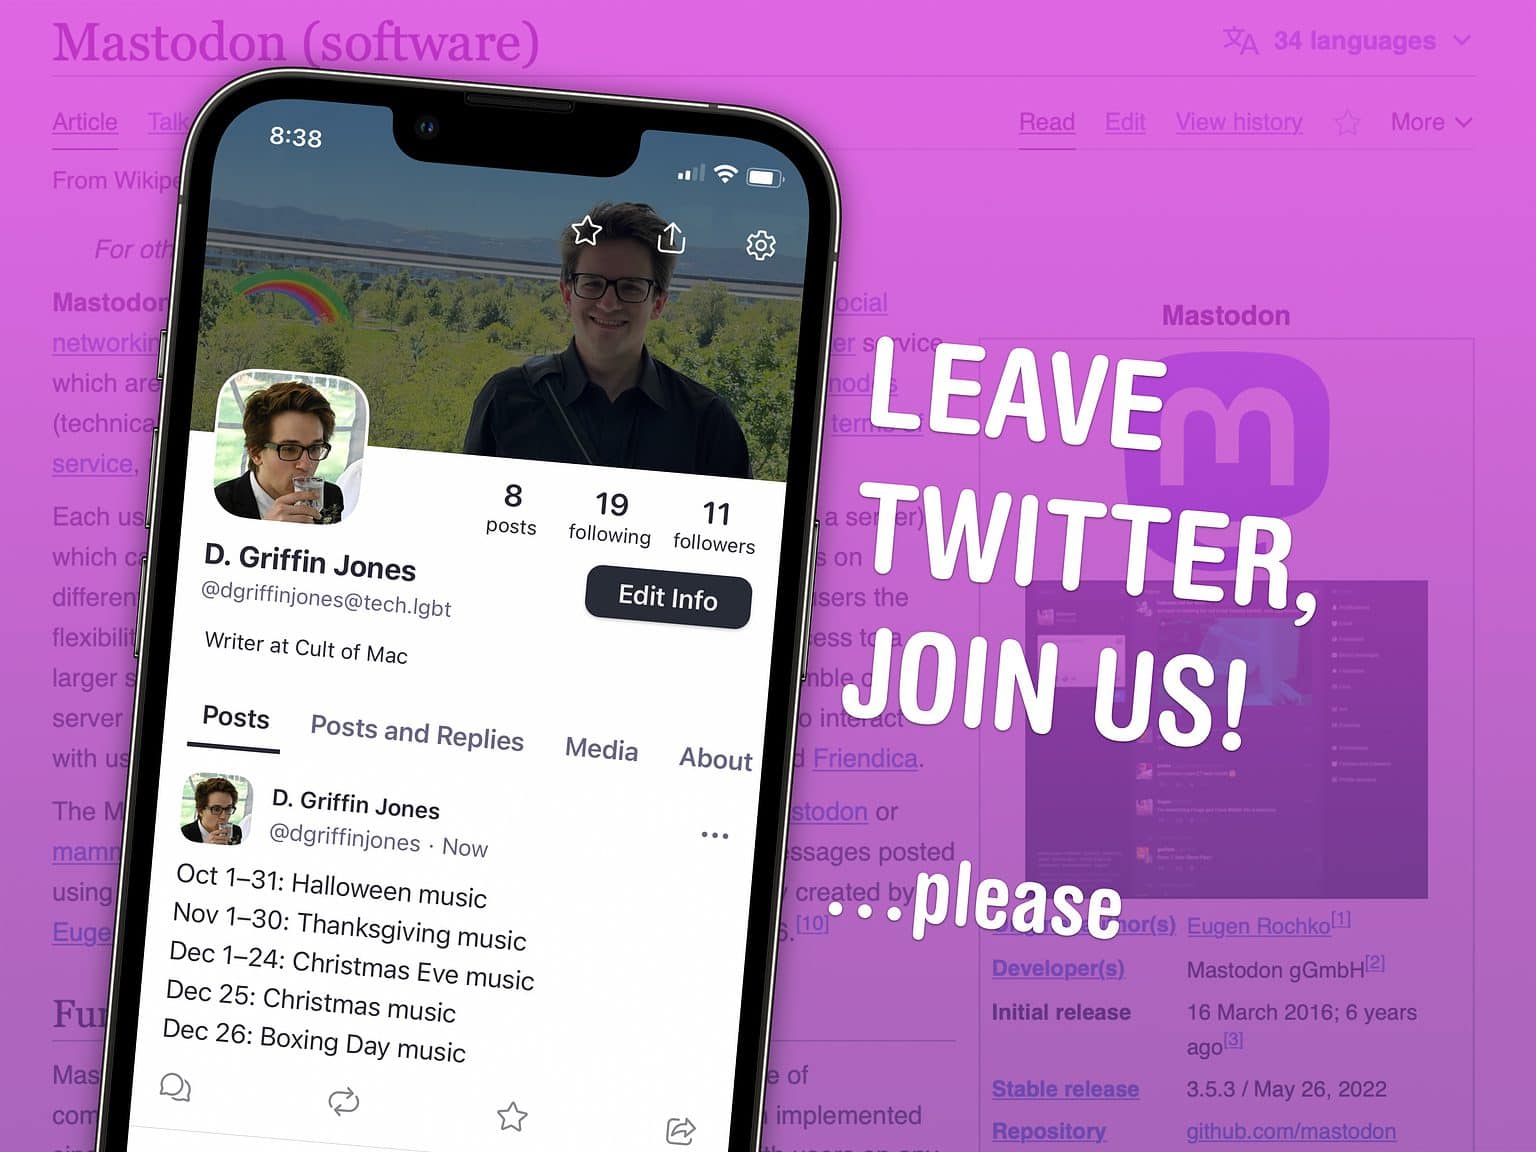 Leave Twitter, join us! …please